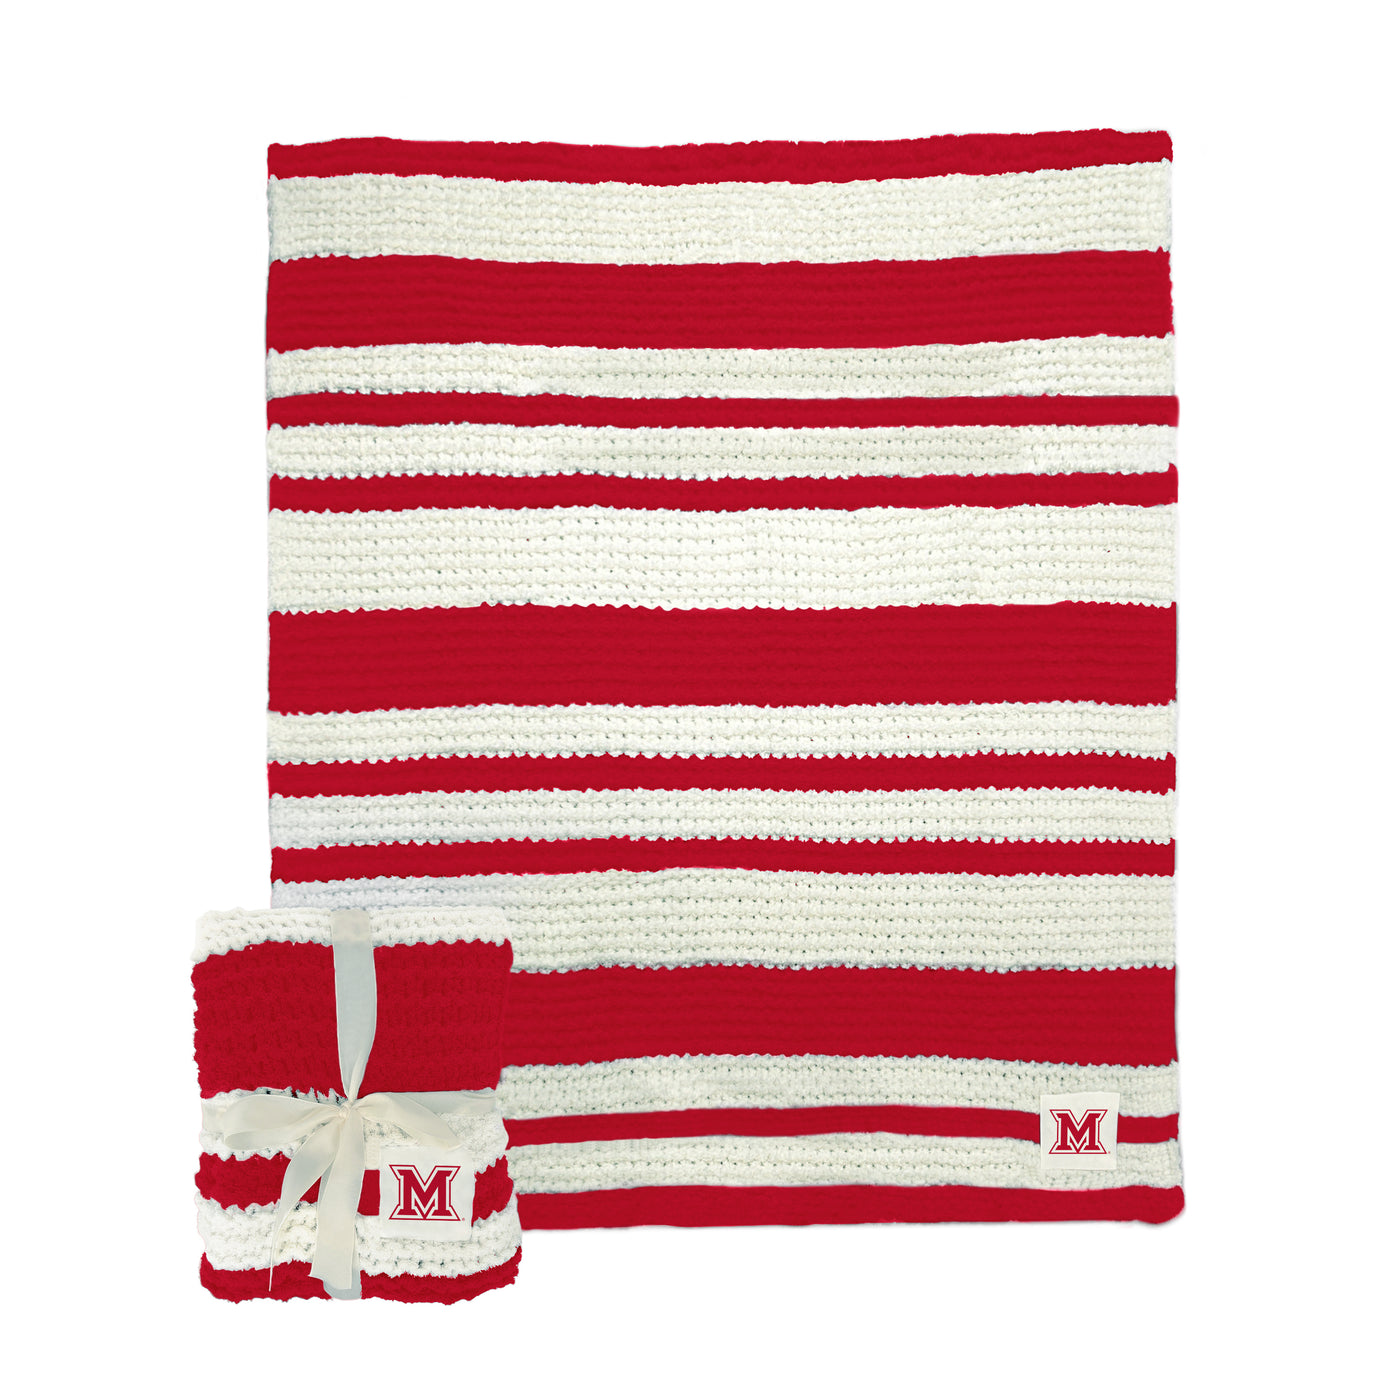 Miami Ohio Red Cable Knit Throw 50x60